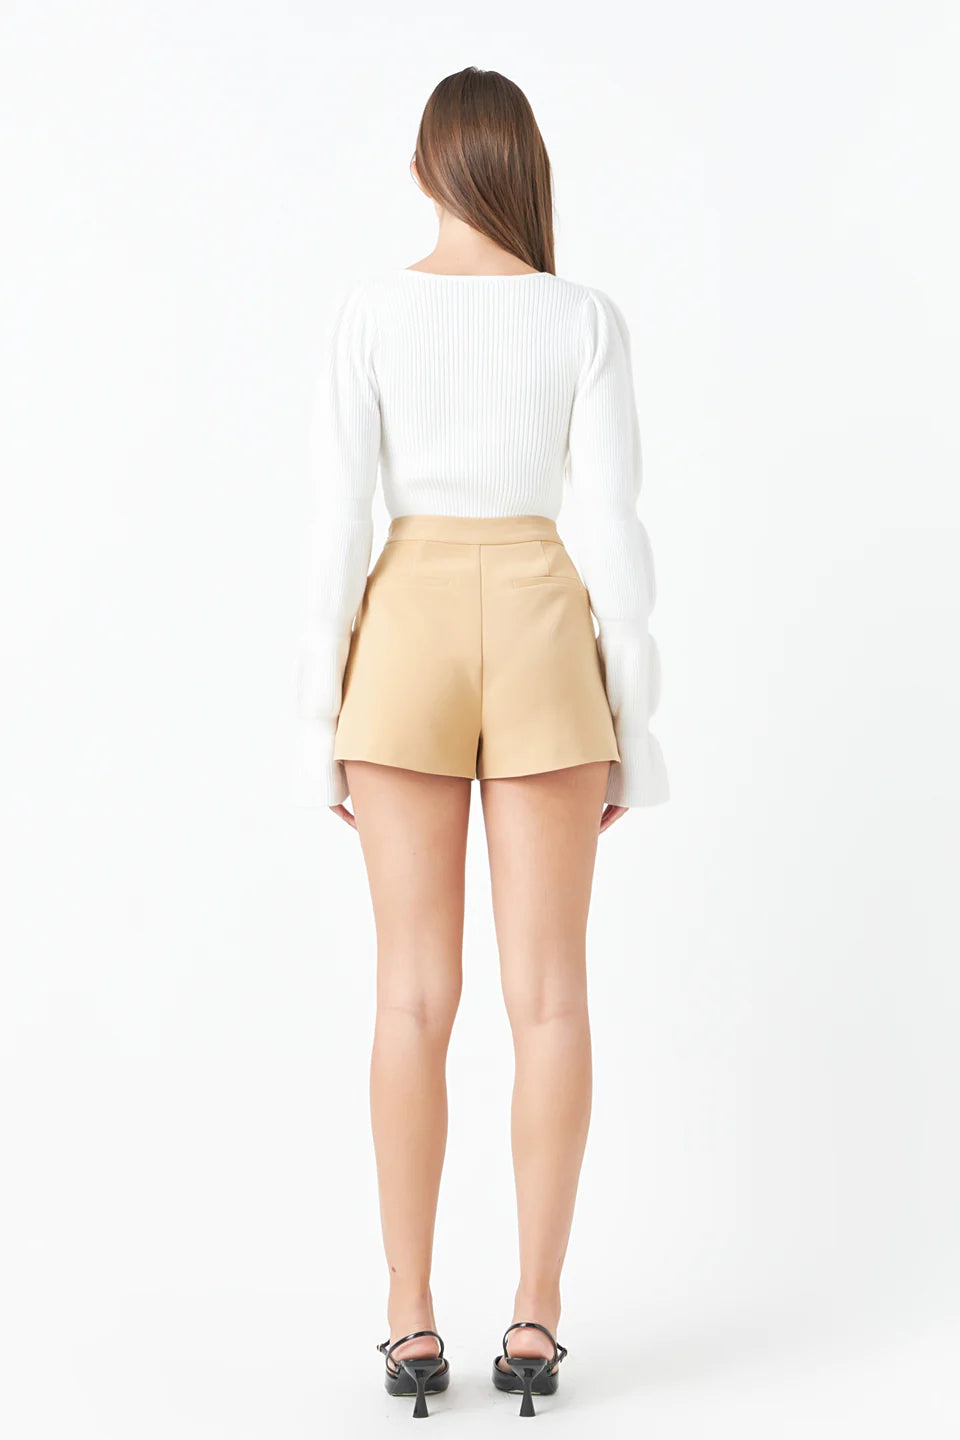 Aaron Gold Button Detail Shorts in Taupe